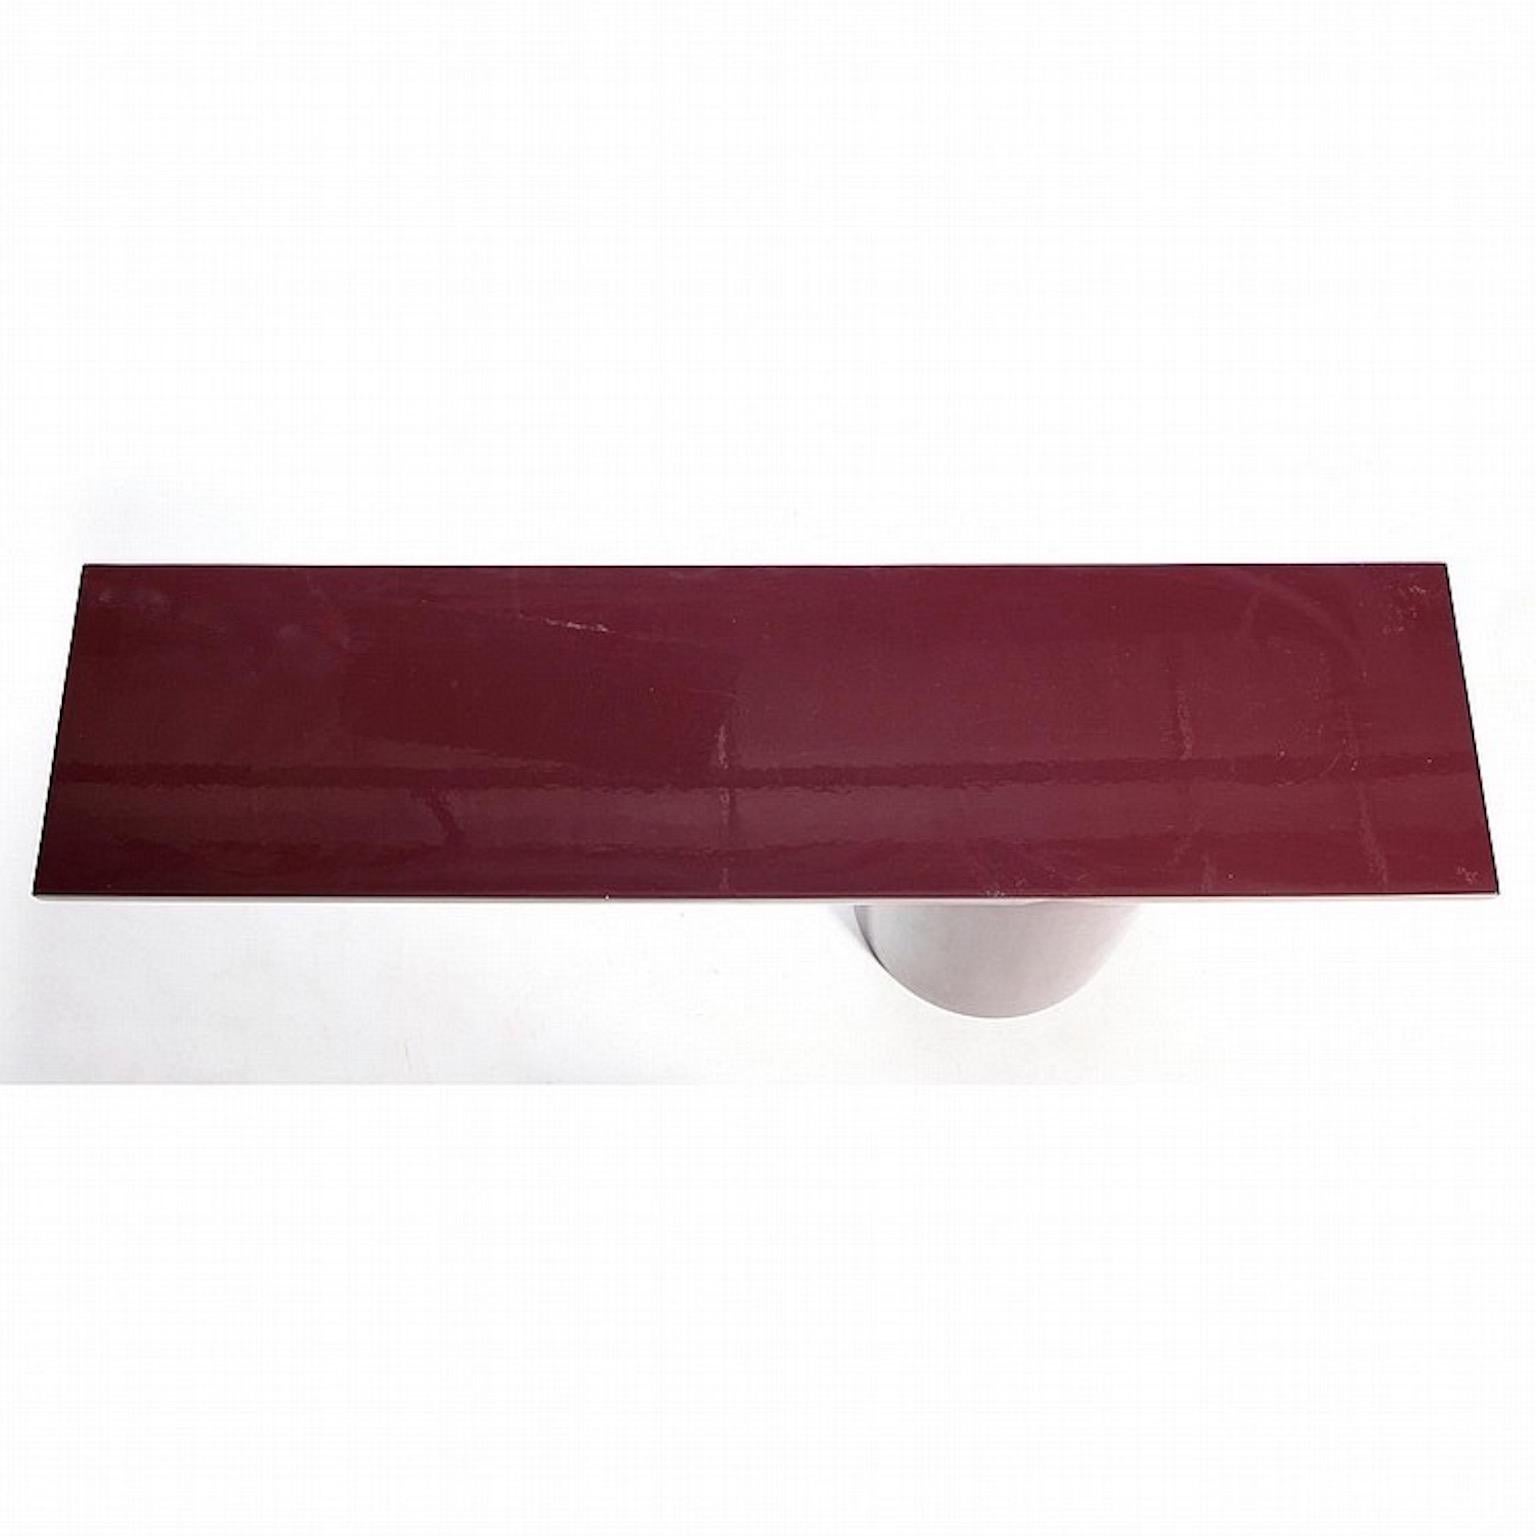 A plum lacquered asymmetric tee cantilevered console table attributed to J. Wade Beam for Brueton, circa 1980s.
Cylindrical weighted base flows and interlocks seamlessly with a half cylinder horizontal top.
Original finish is high gloss lacquered